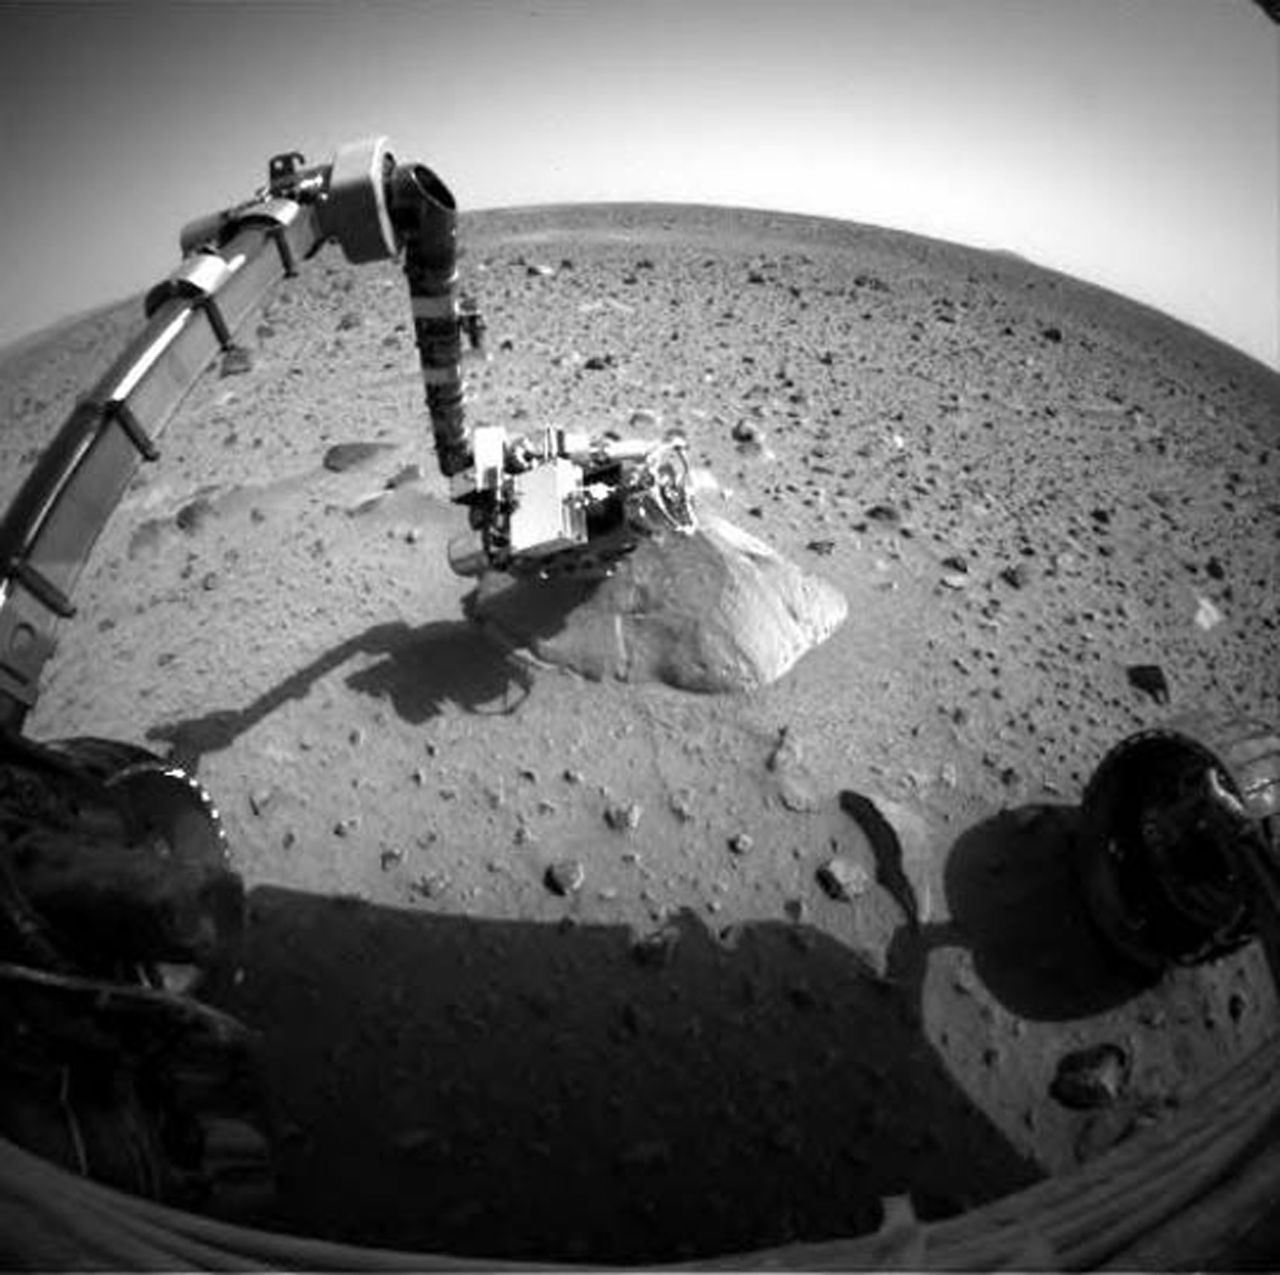 It wouldn't be the first time NASA has landed on Mars -- albeit without humans on board. Here, the rover 'Spirit' sends images of the "Red Planet" back to Earth in 2004. The mission lasted until 2010.